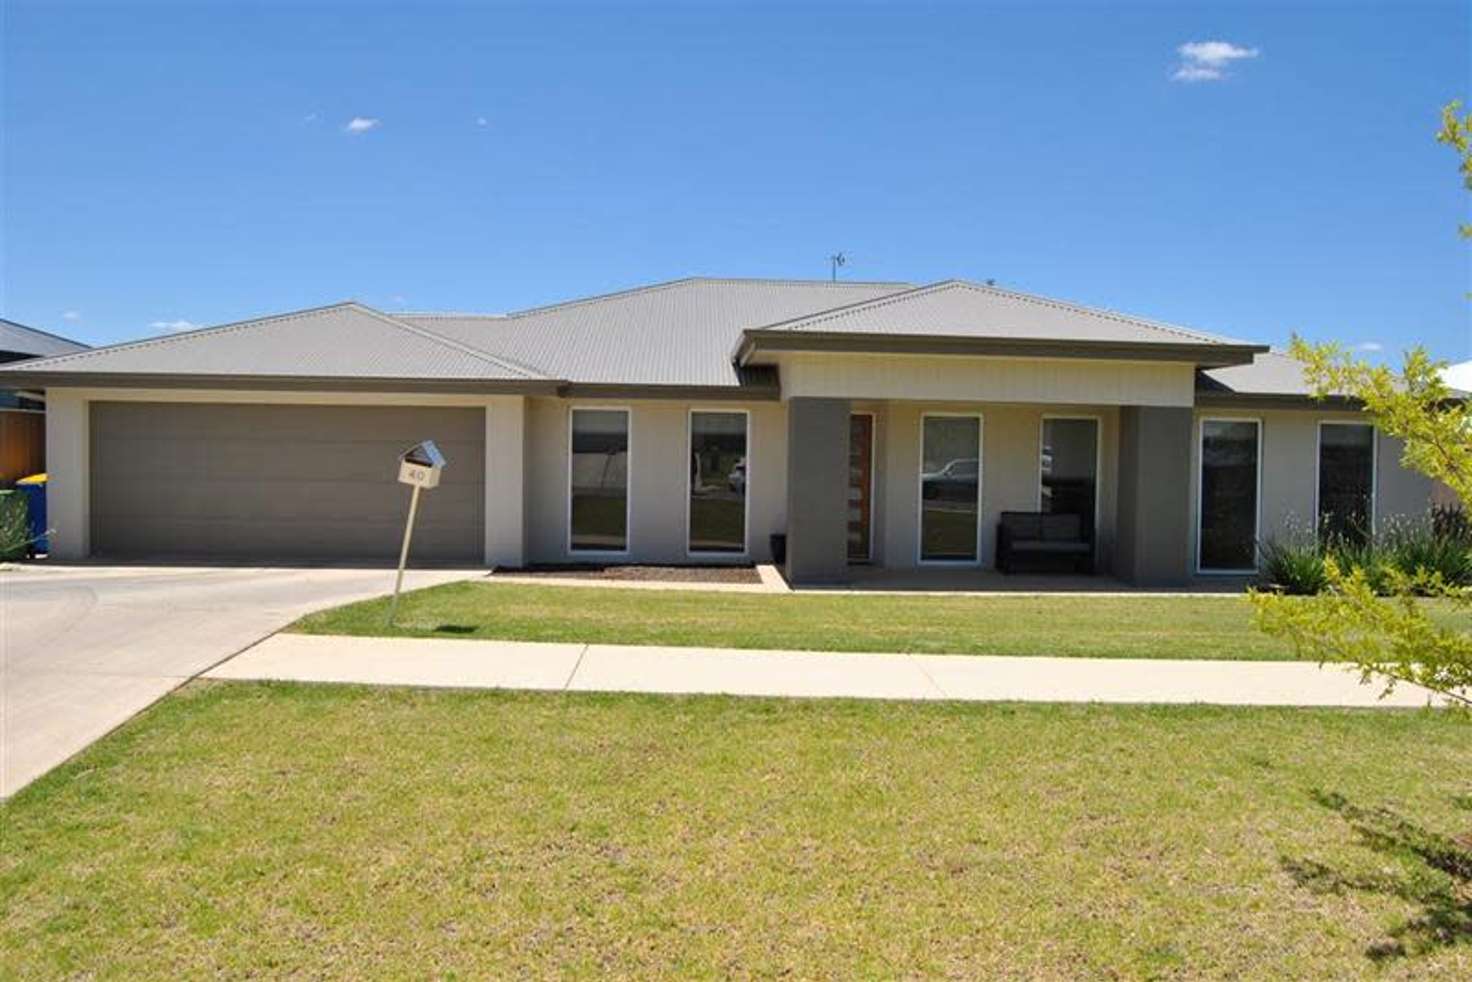 Main view of Homely house listing, 40 Strickland Dr, Boorooma NSW 2650